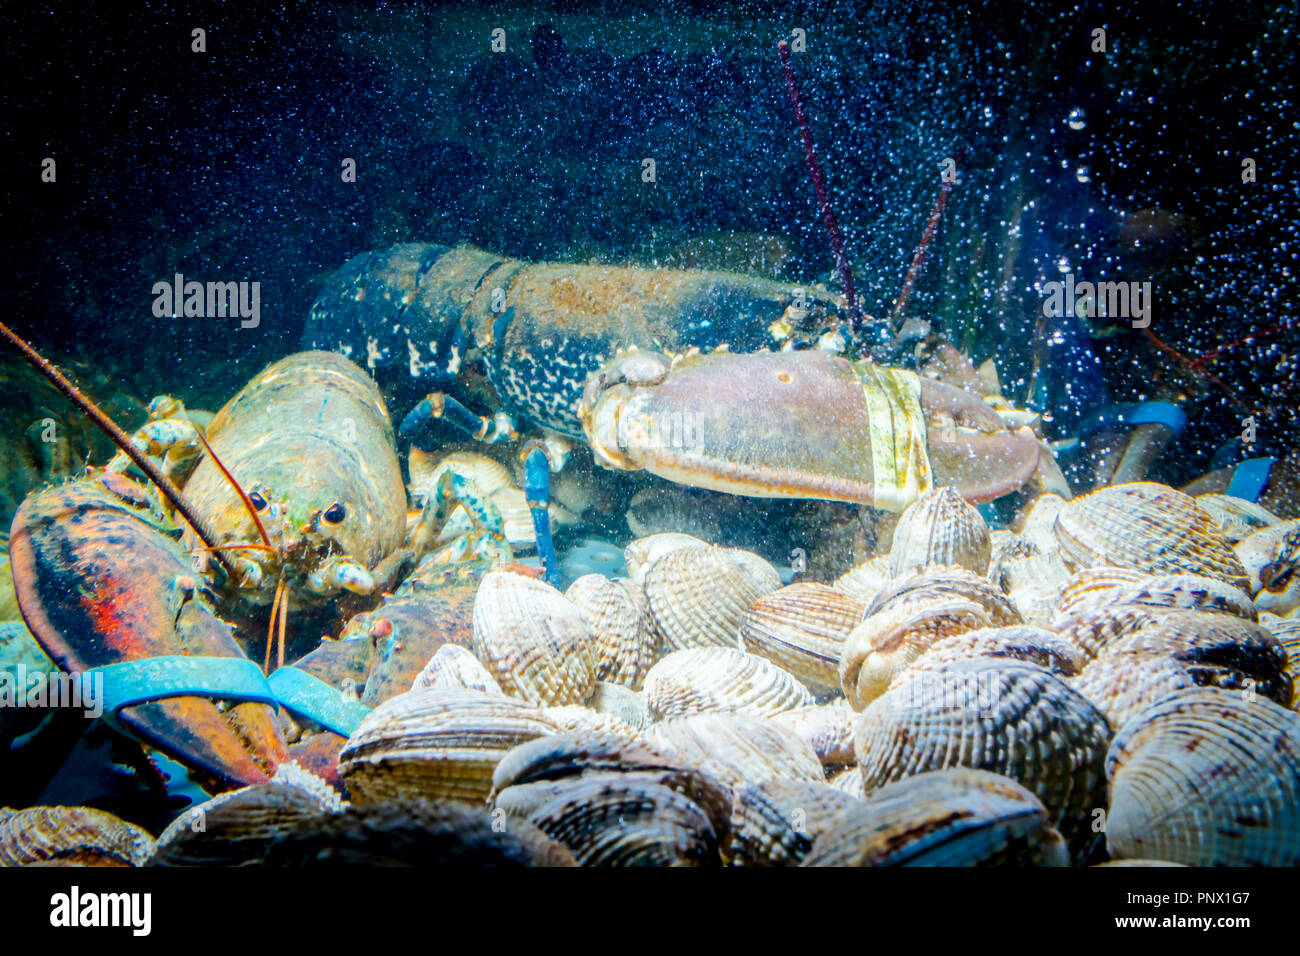 Live exotic and expensive crayfish with tied claws on pile of clams are in aquarium, tank at traditional seafood restaurant for sale. Stock Photo